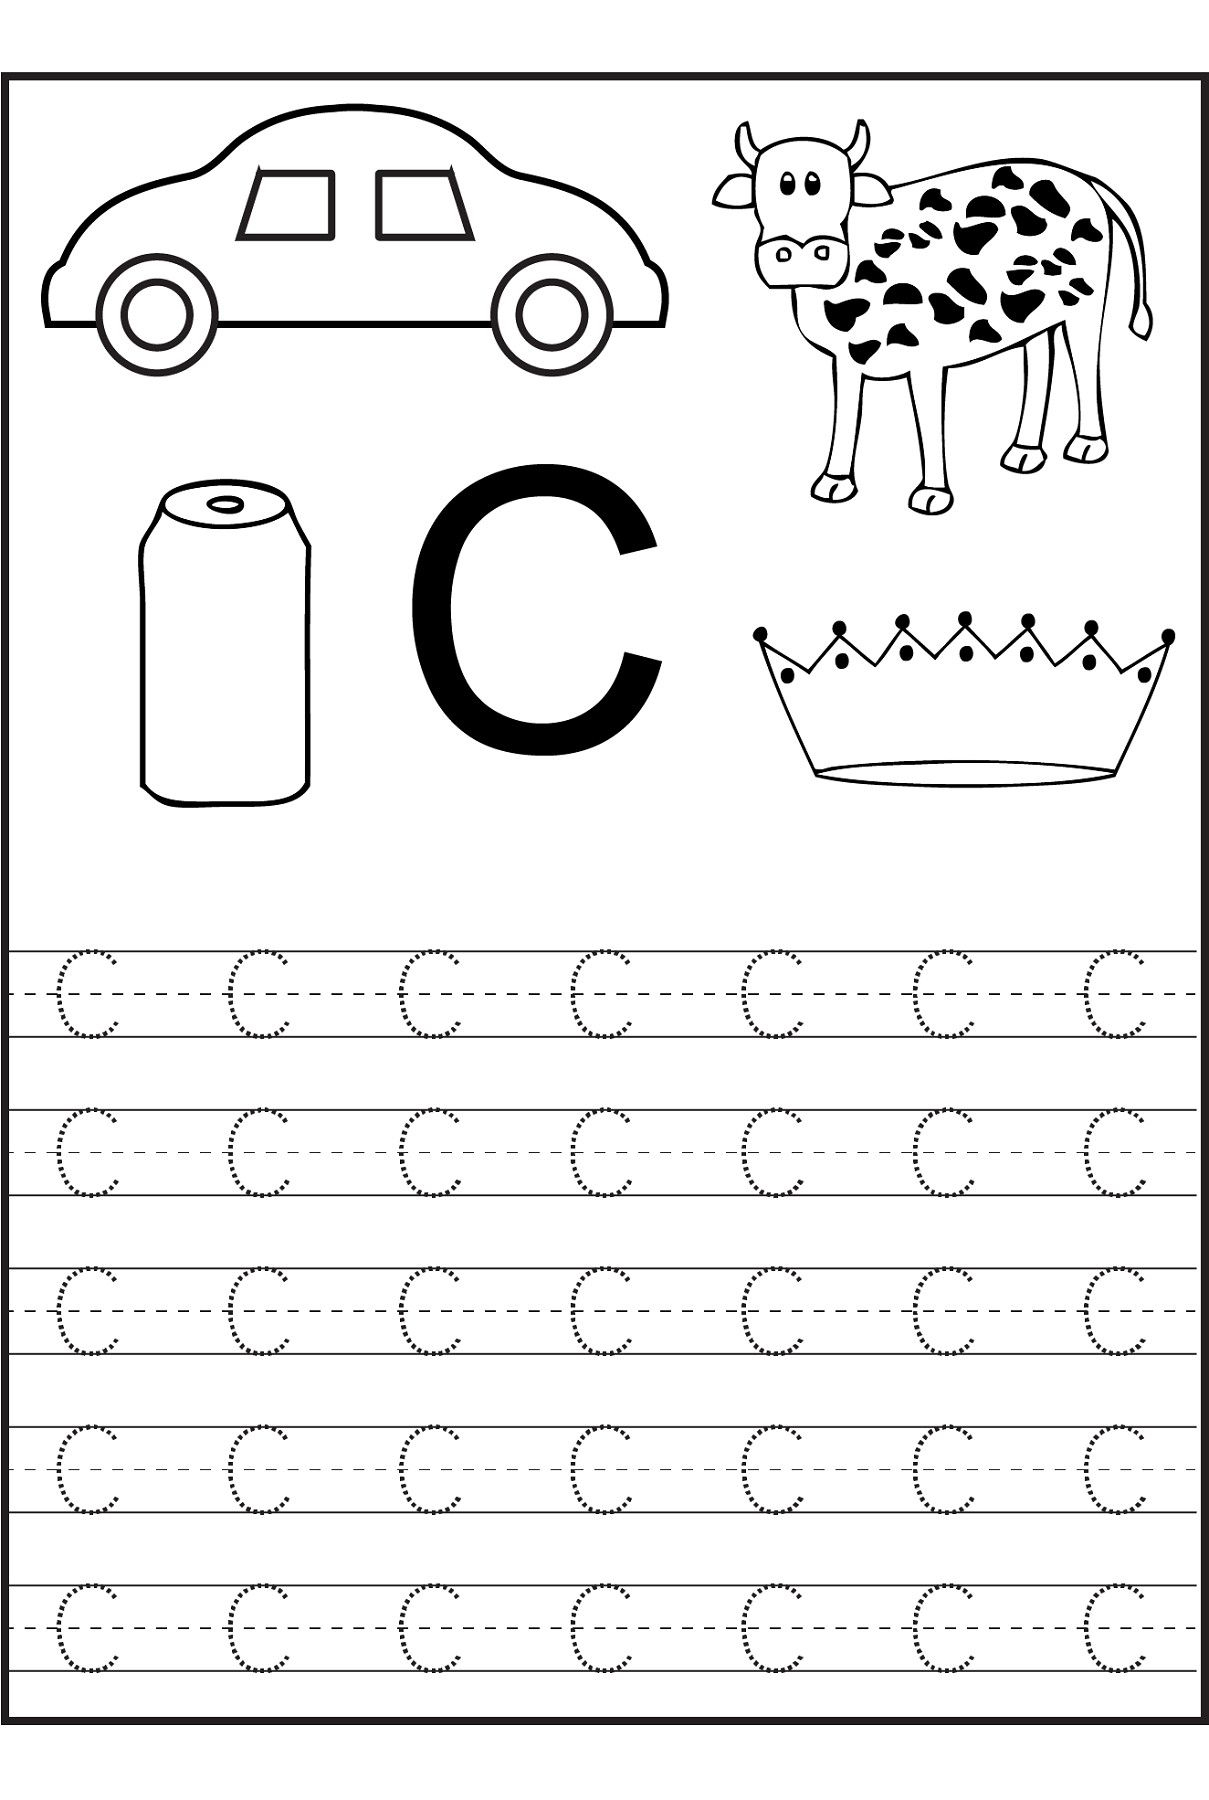 4 Alphabet Worksheets Videos Activities In 2020 | Learning in Alphabet Tracing Videos